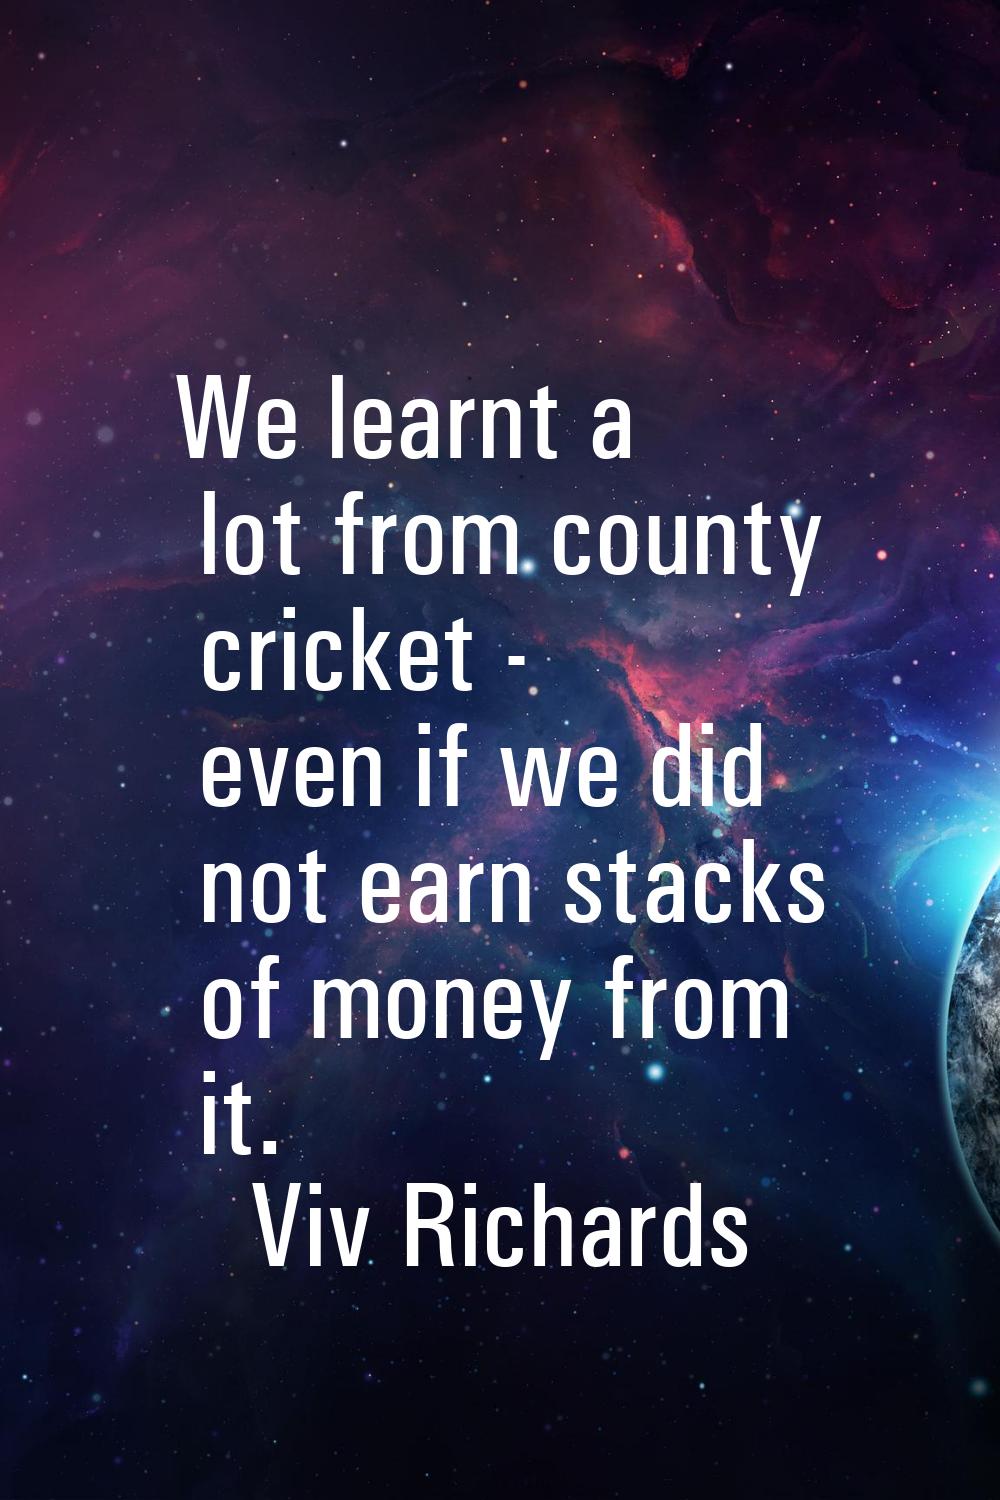 We learnt a lot from county cricket - even if we did not earn stacks of money from it.